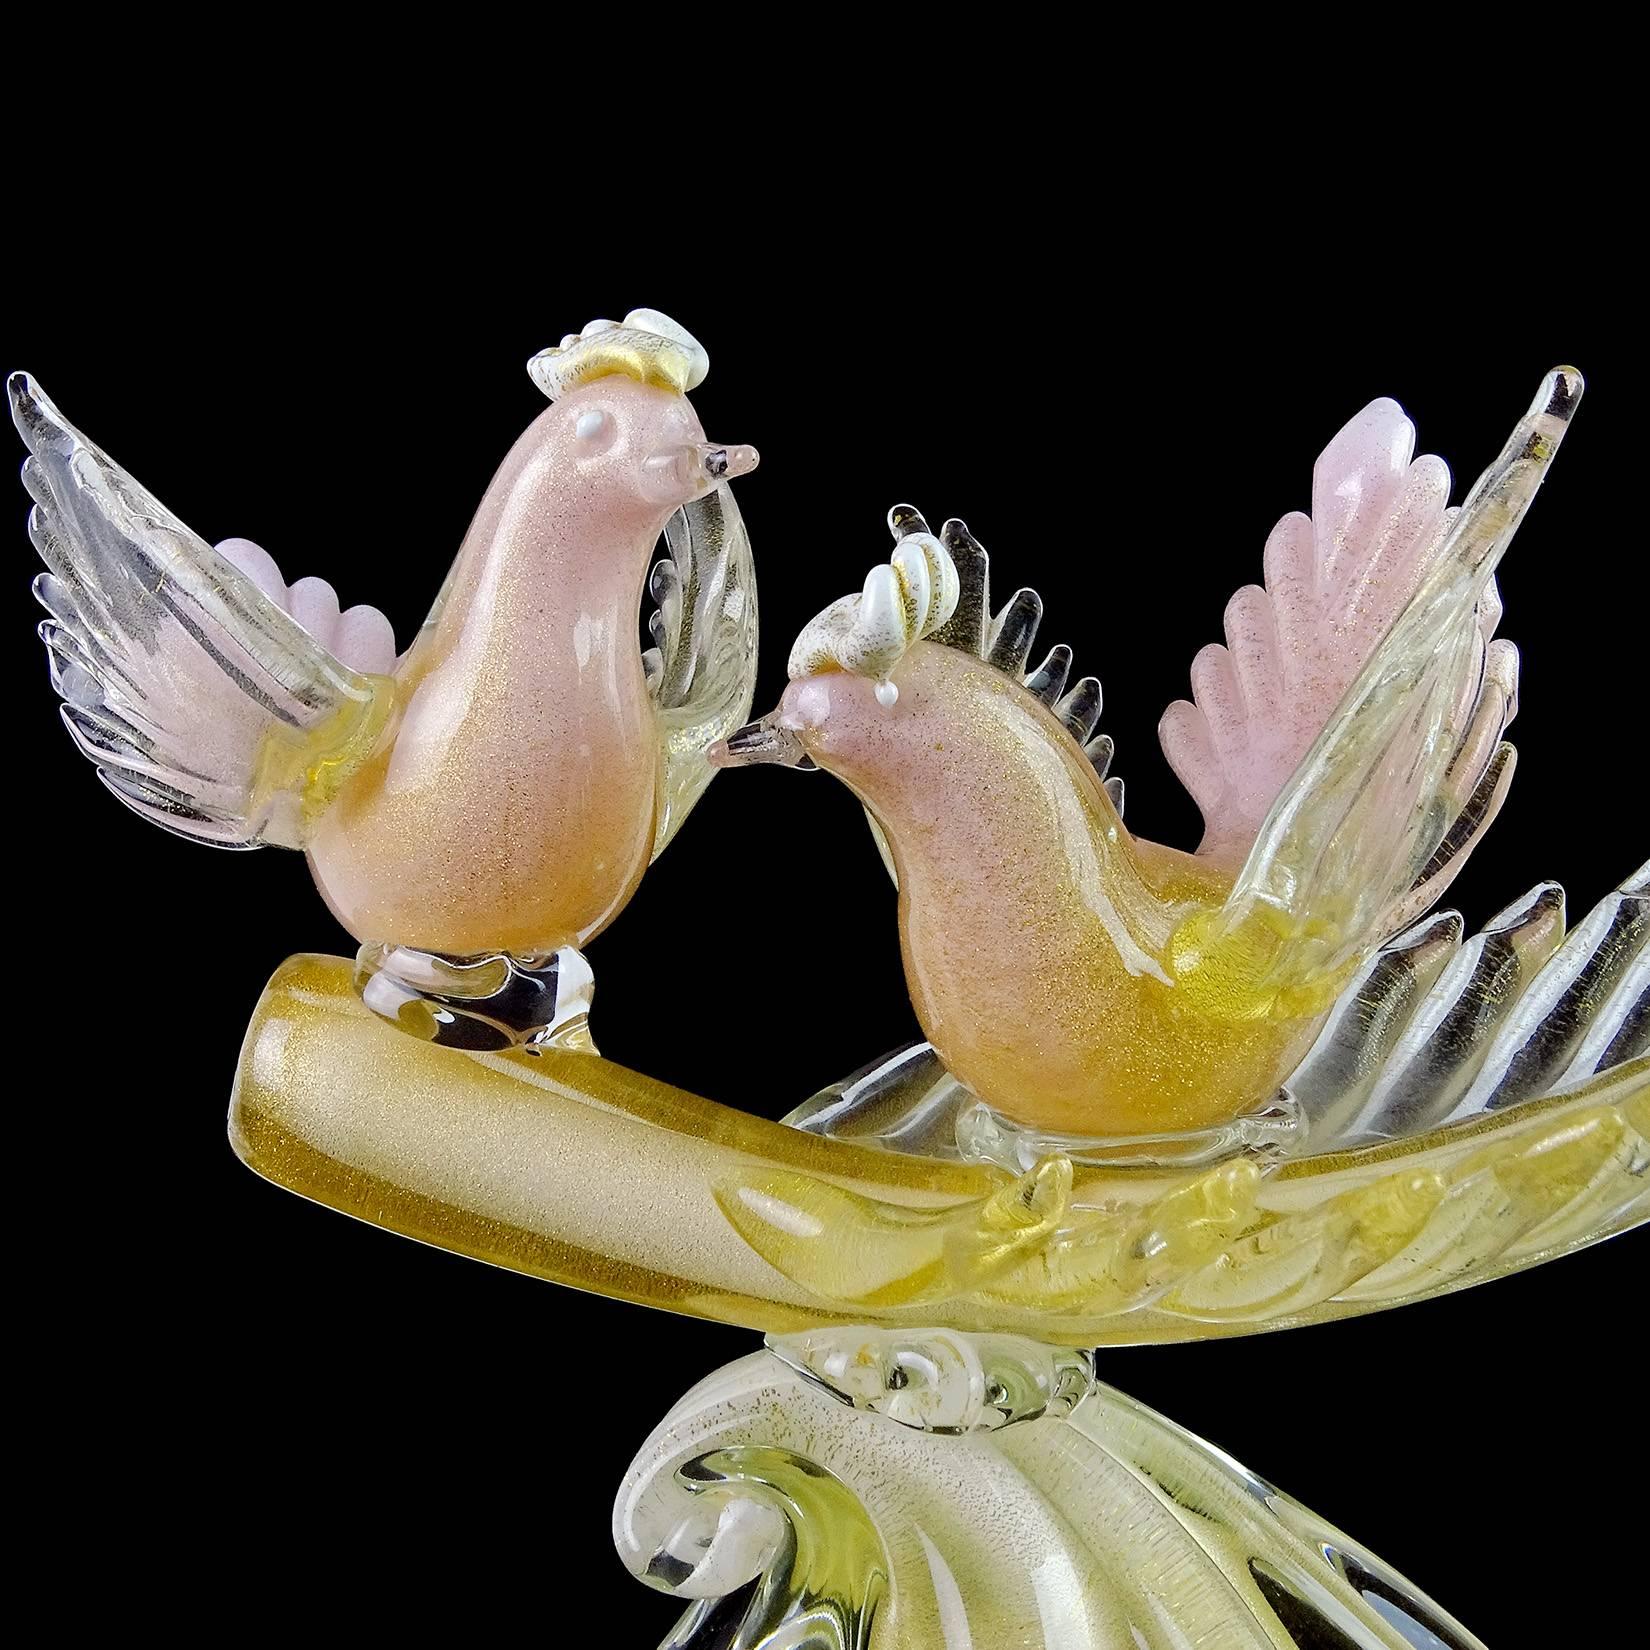 Gorgeous large Murano hand blown pink, white and gold flecks Italian art glass courting birds on leaf sculpture. Documented to designer Alfredo Barbini. The birds are beautifully sculpted and profusely filled with gold leaf throughout. They sit on a